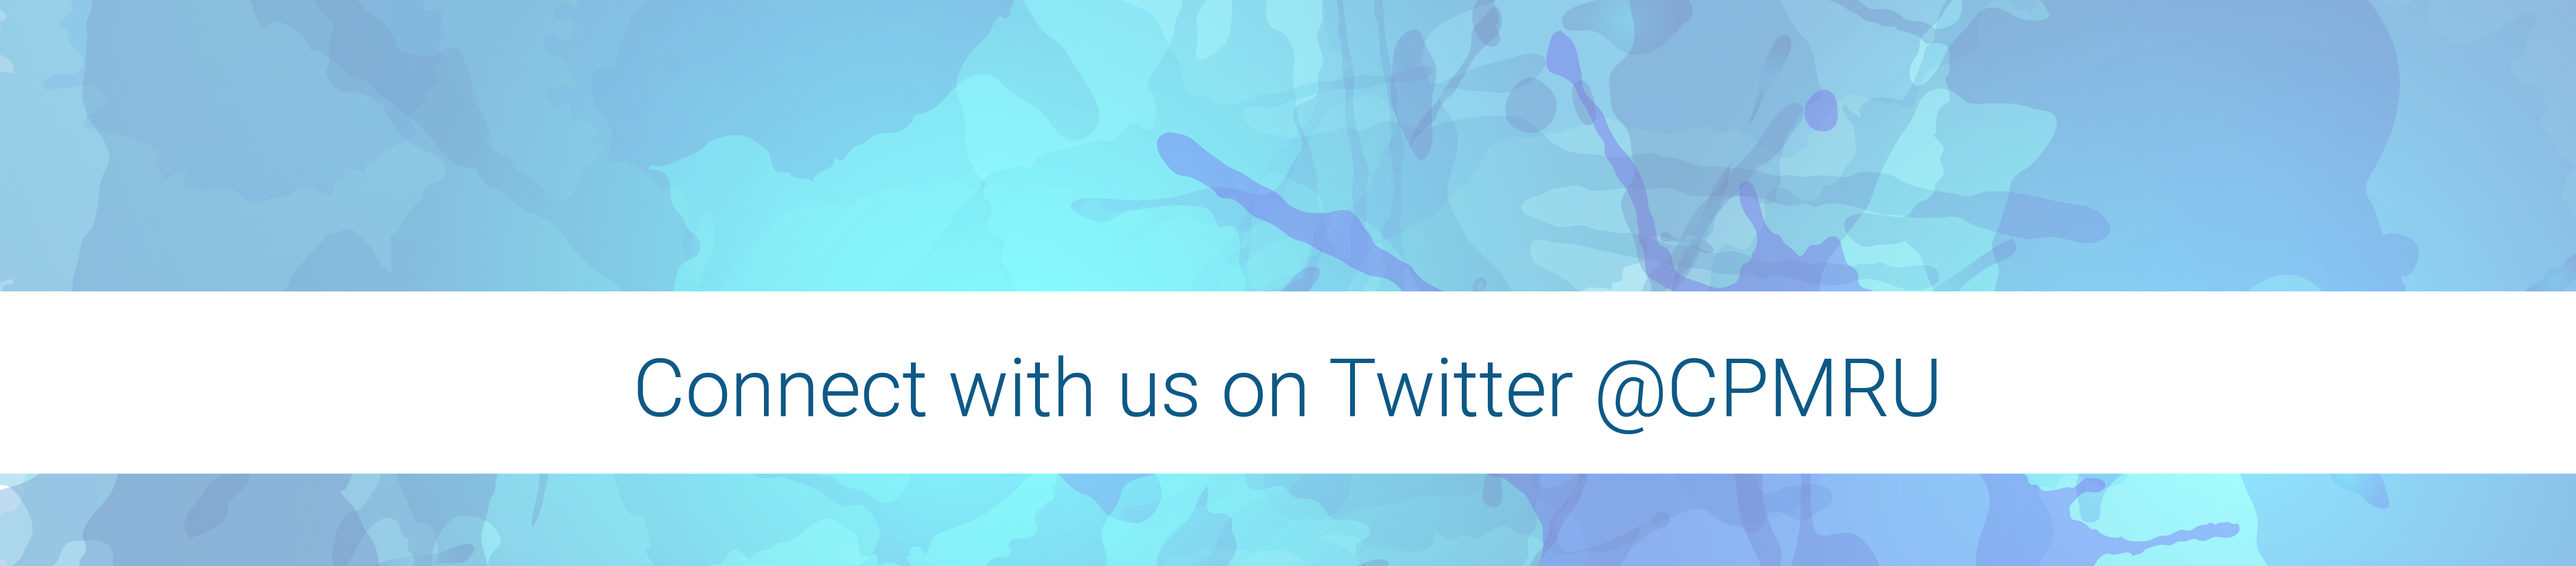 Connect with us on Twitter